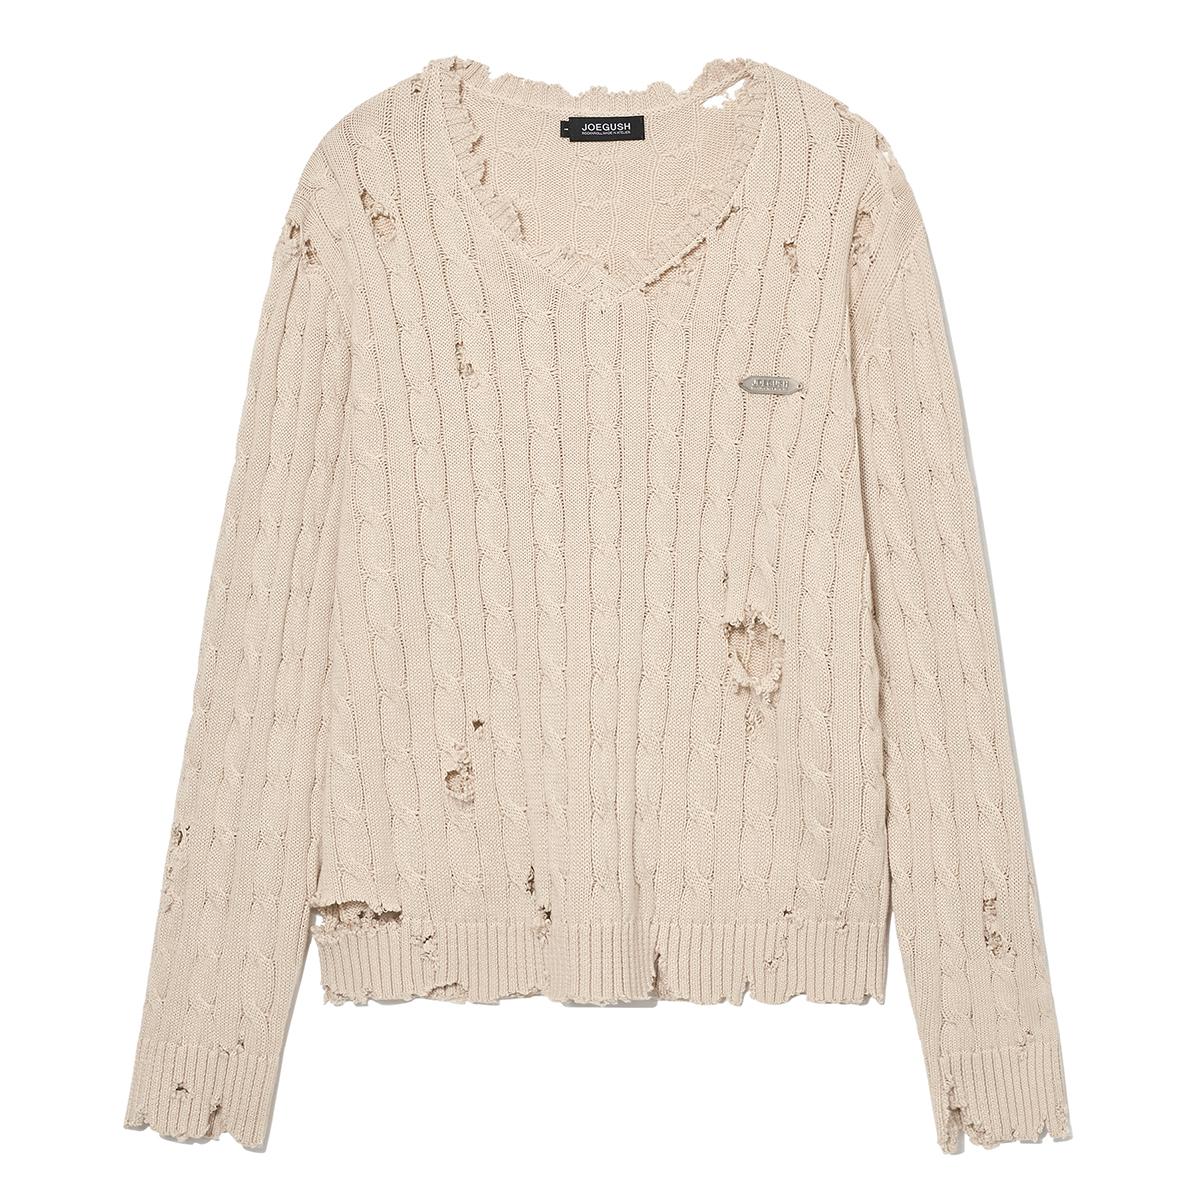 Distressed Cable knit LV.2 (Ivory)